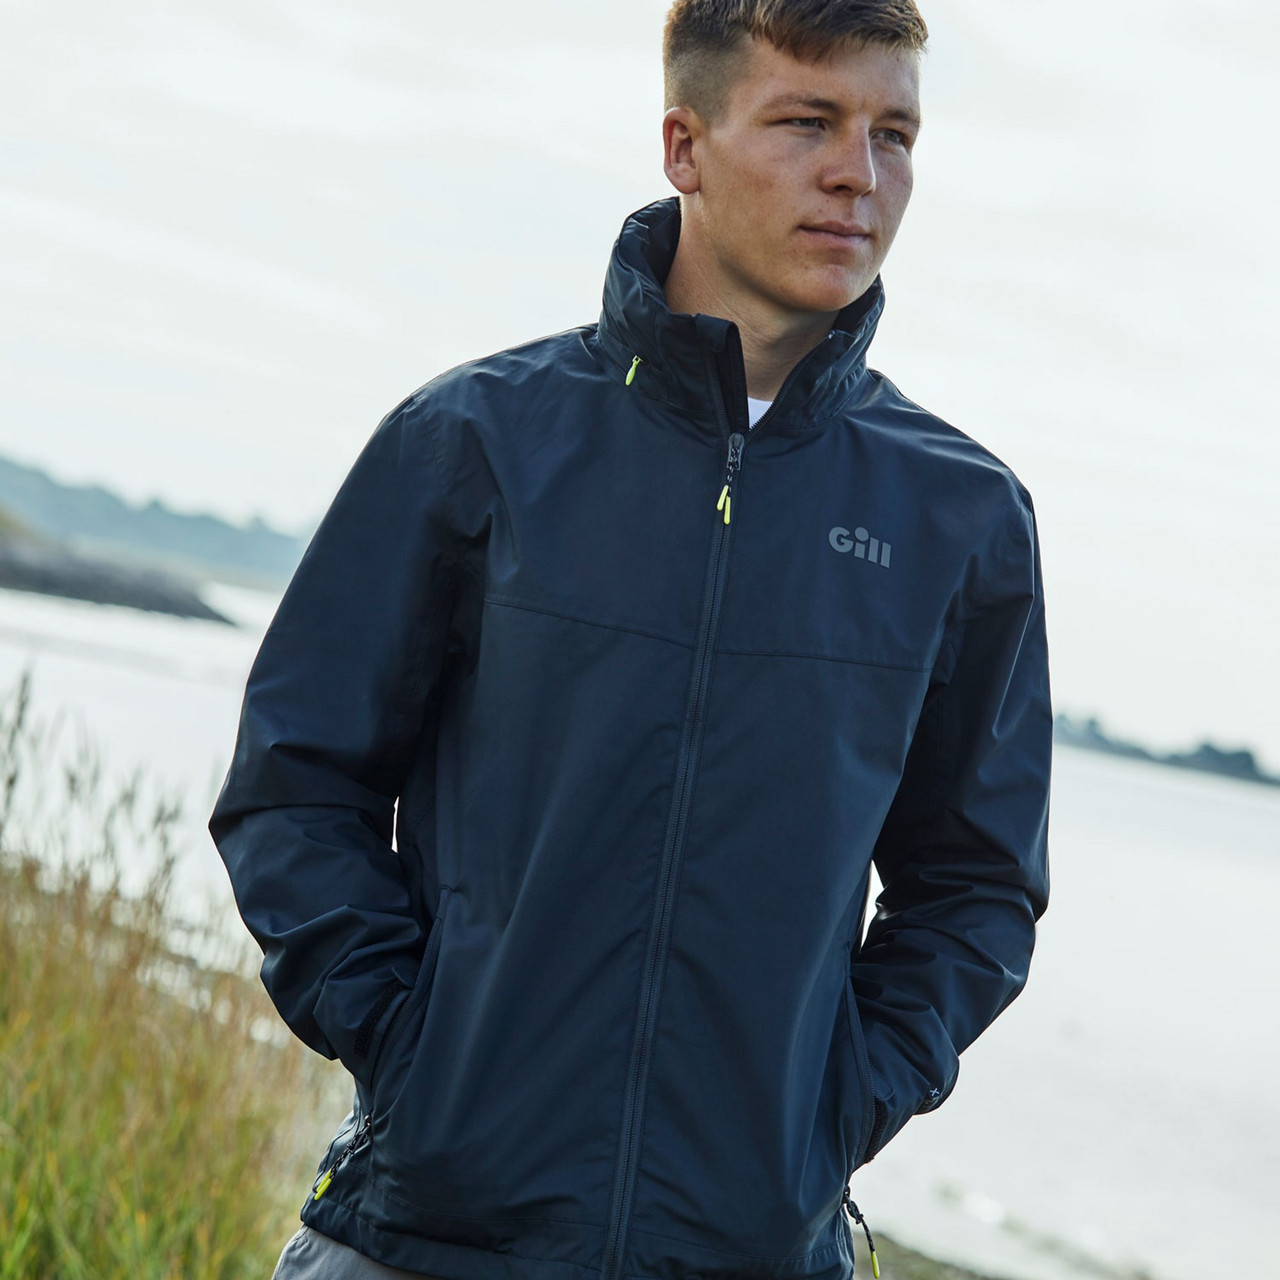 Pilot Jacket - Gill Marine Official US Store